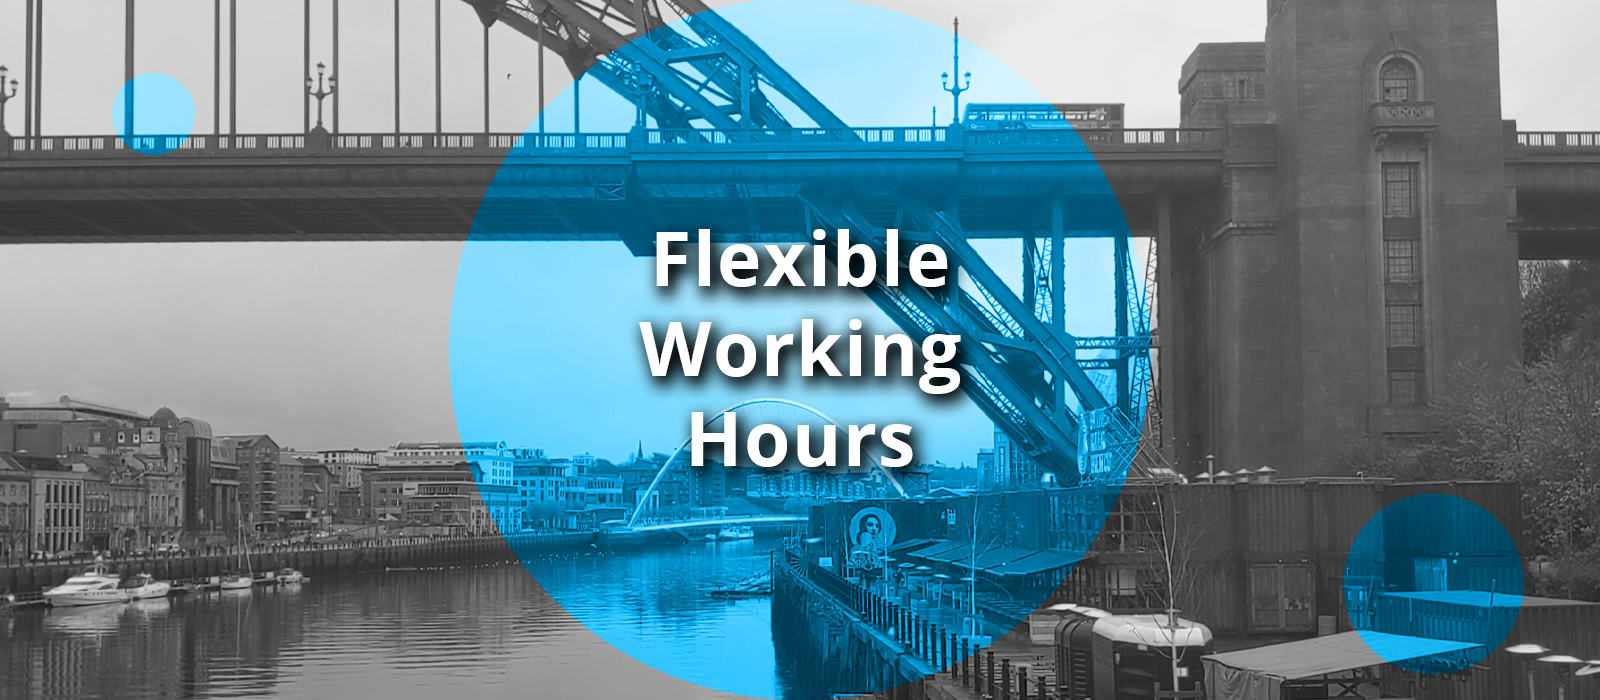 Understanding Your Right to Request Flexible Working Hours